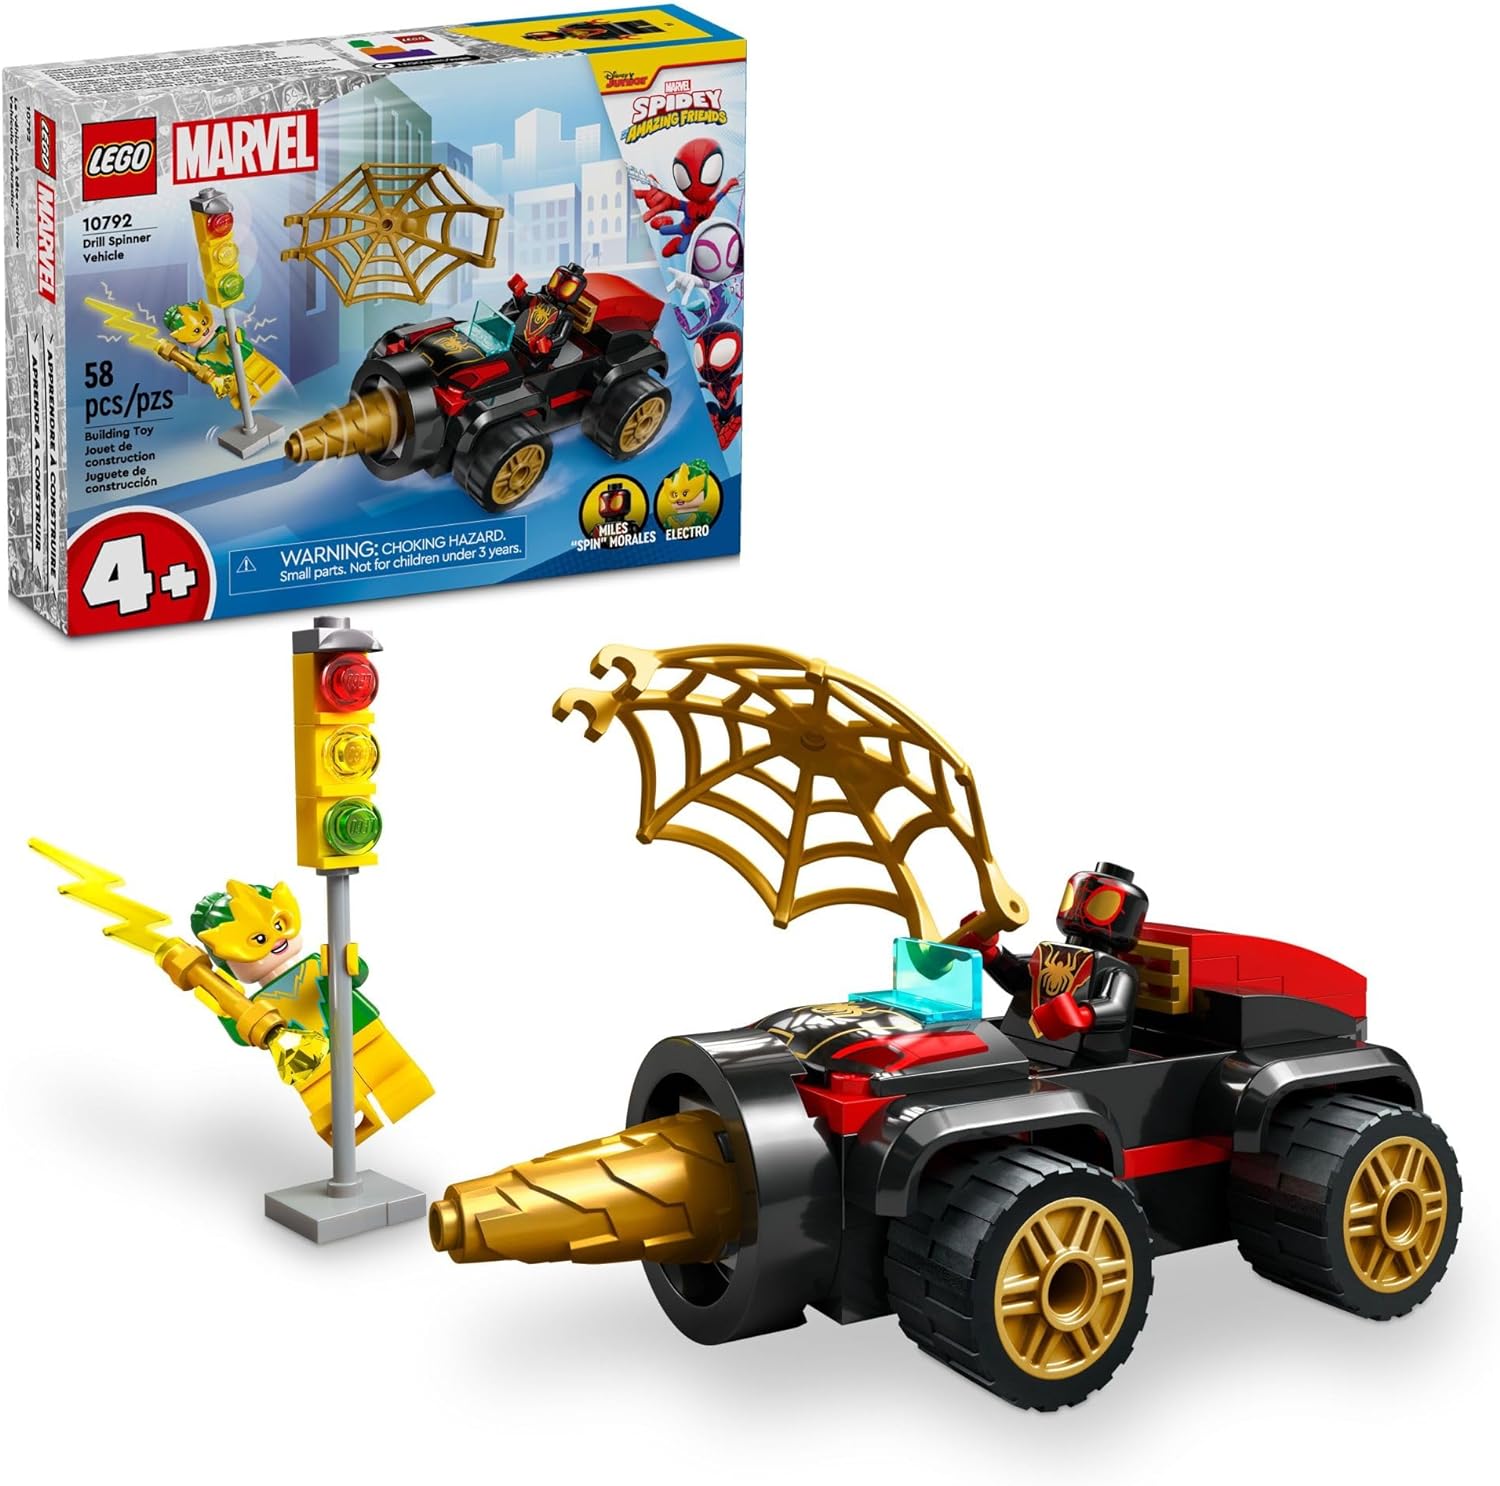 LEGO 10792 Marvel Drill Spinner Vehicle, Miles Morales Spin Car with 2 Minifigures